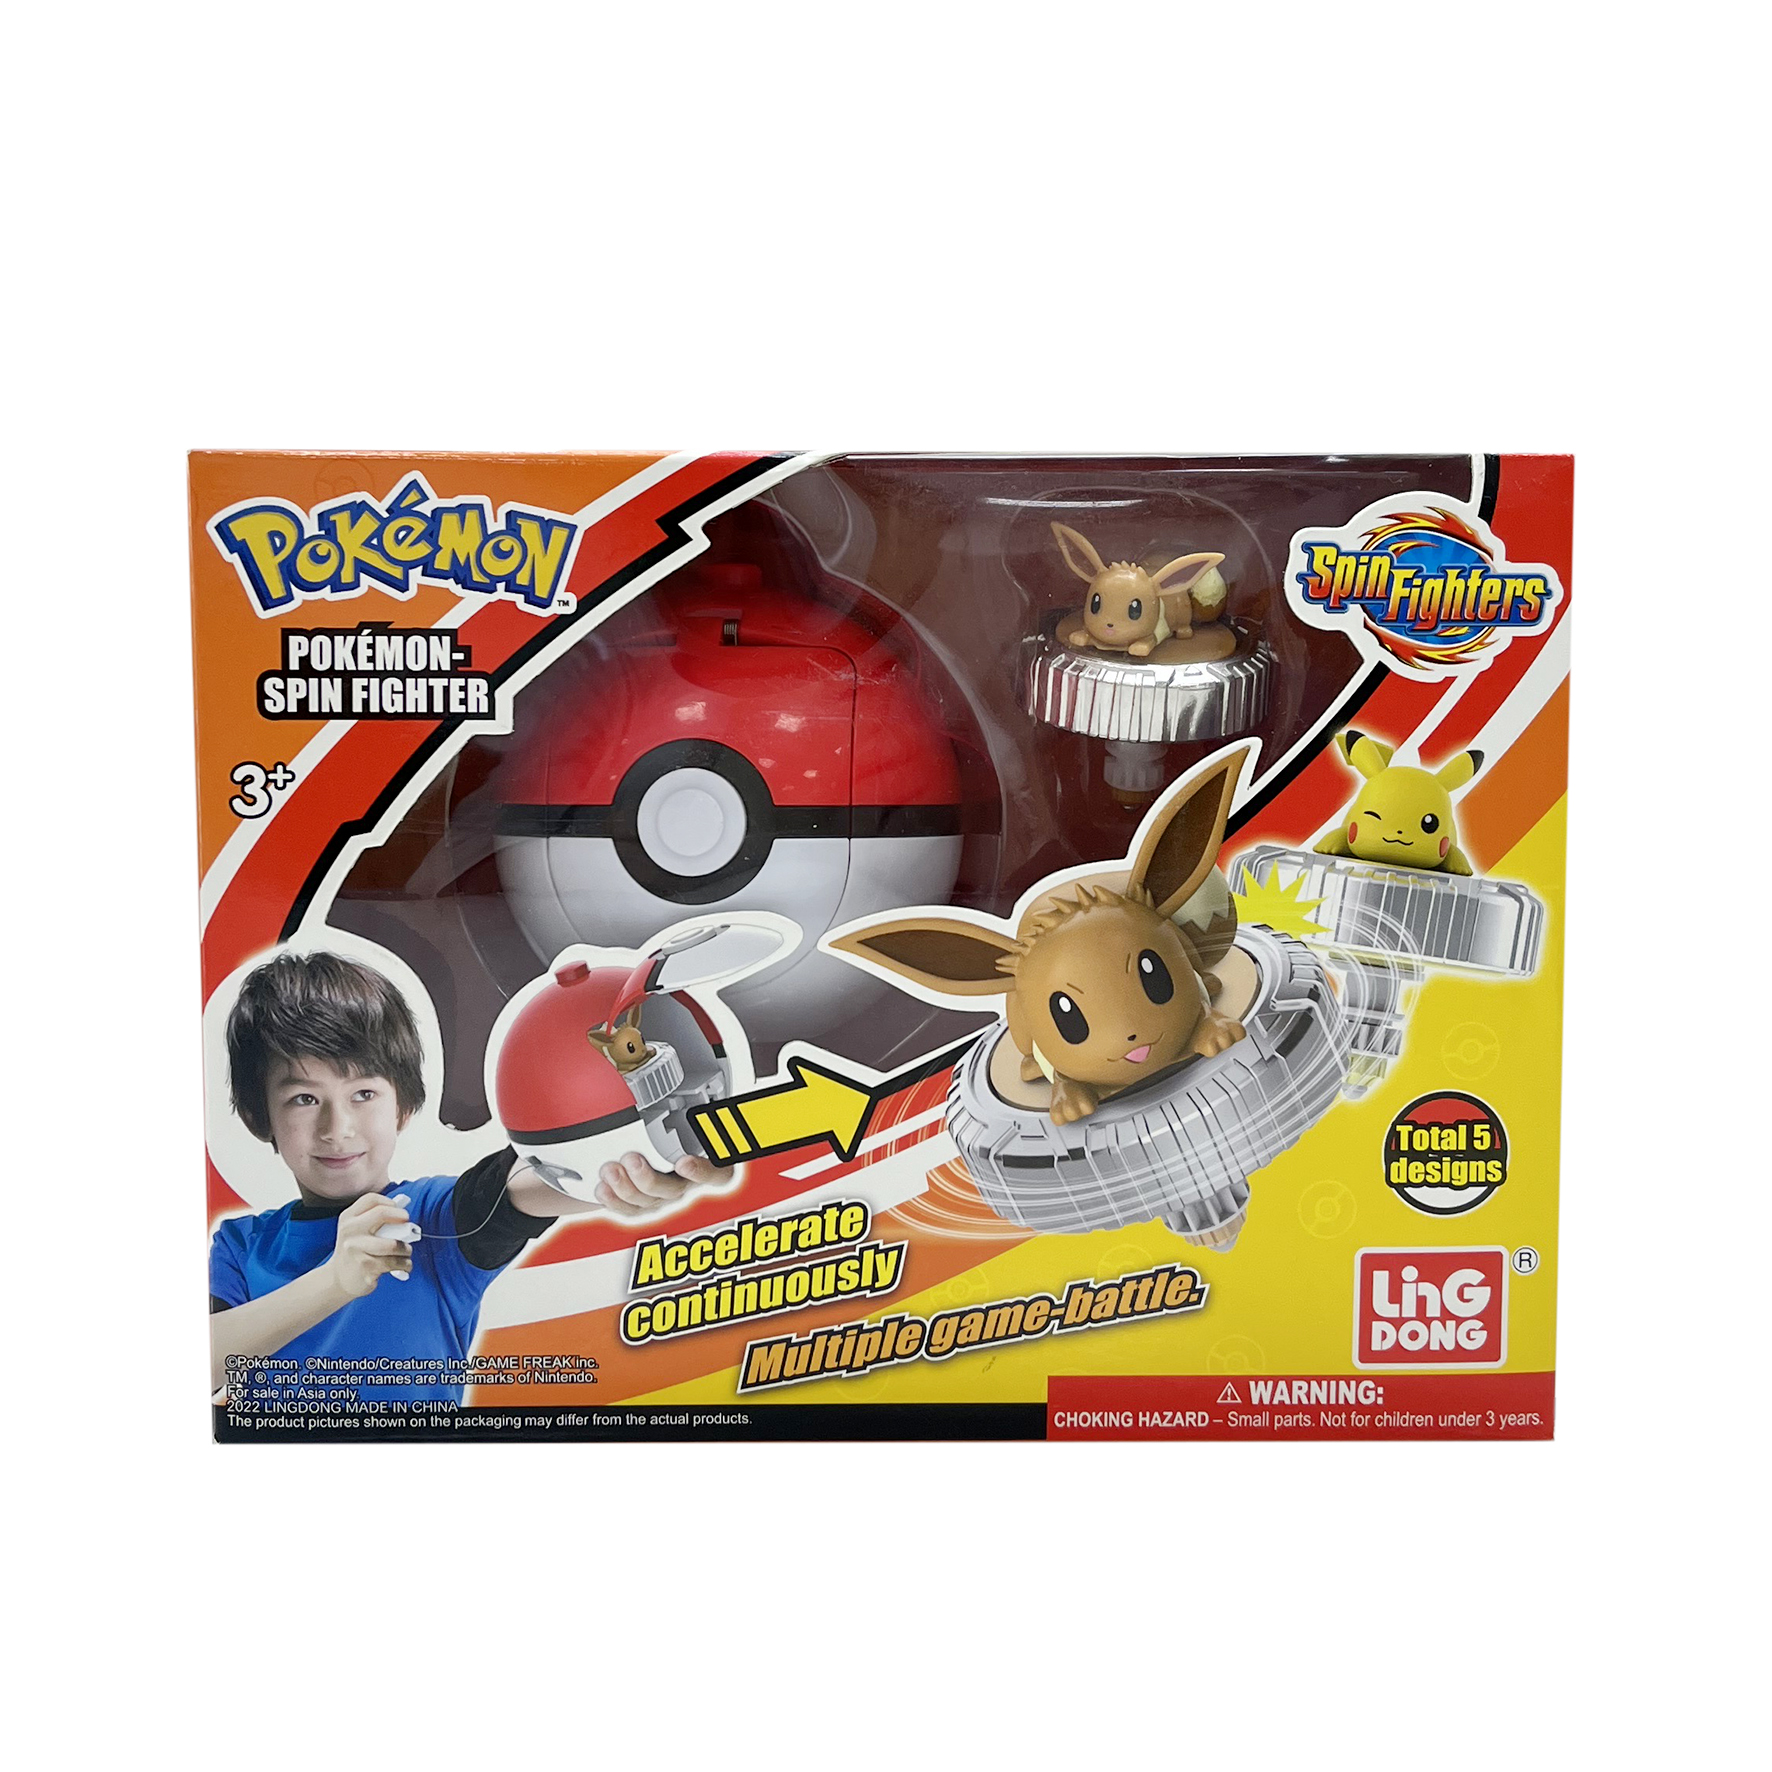 Pokemon-Spin Fighter, , large